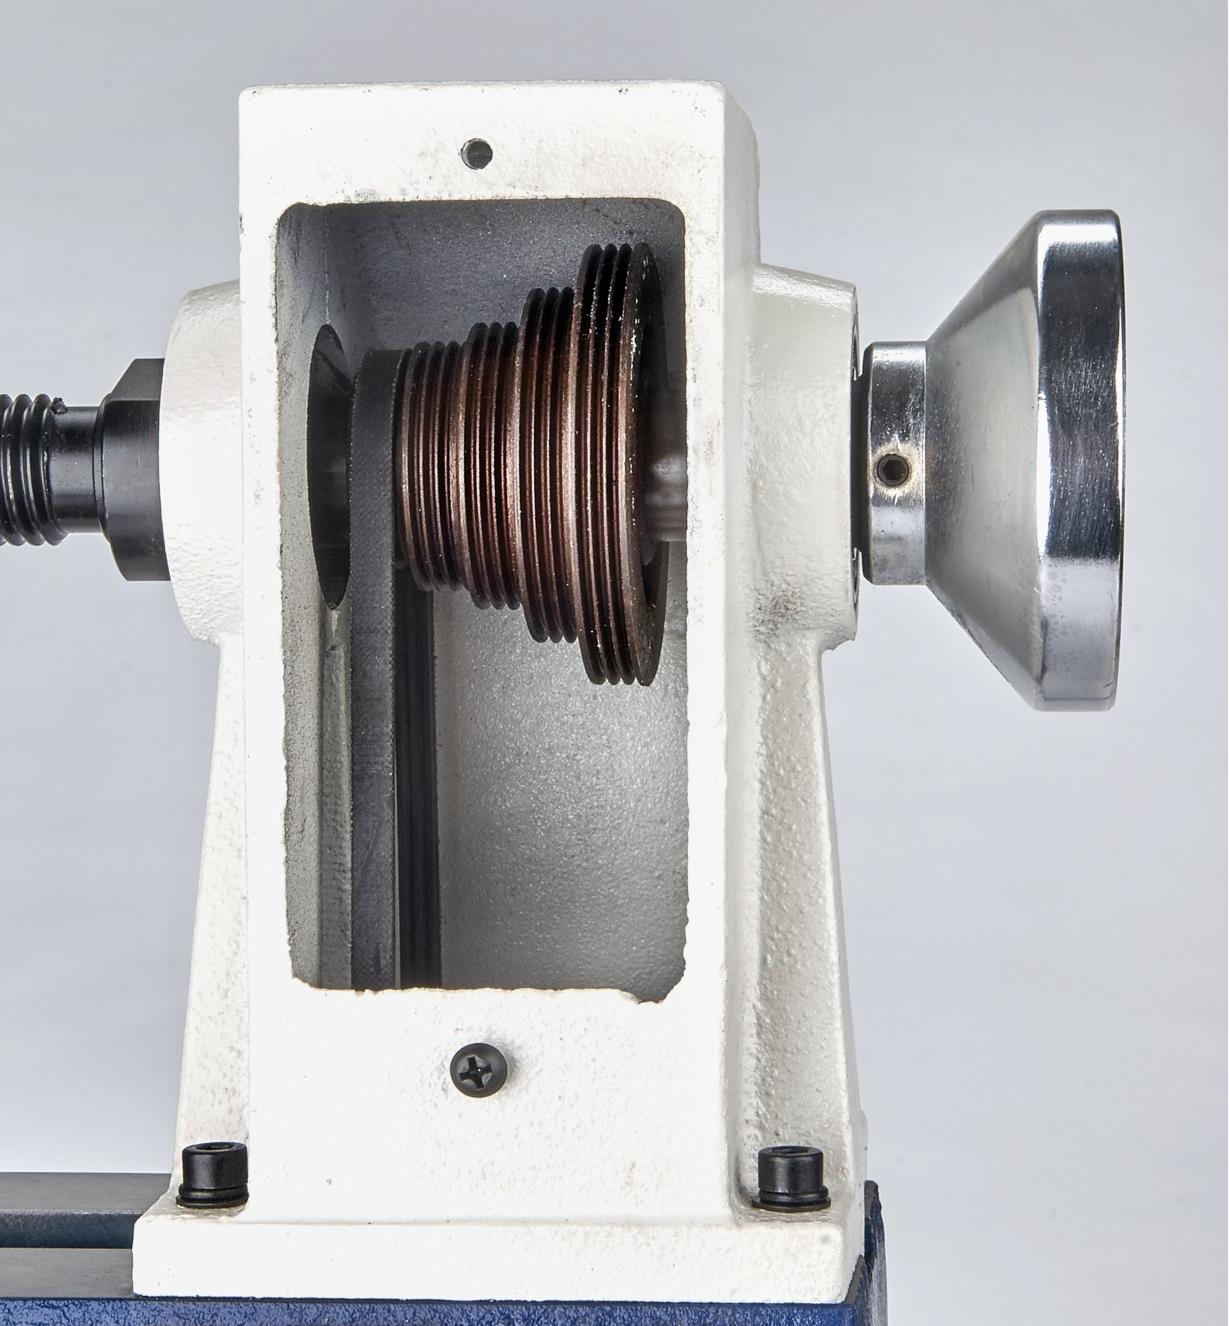 A close view of the stepped belt drive used to set the speed of a Rikon model 70-105 mini lathe